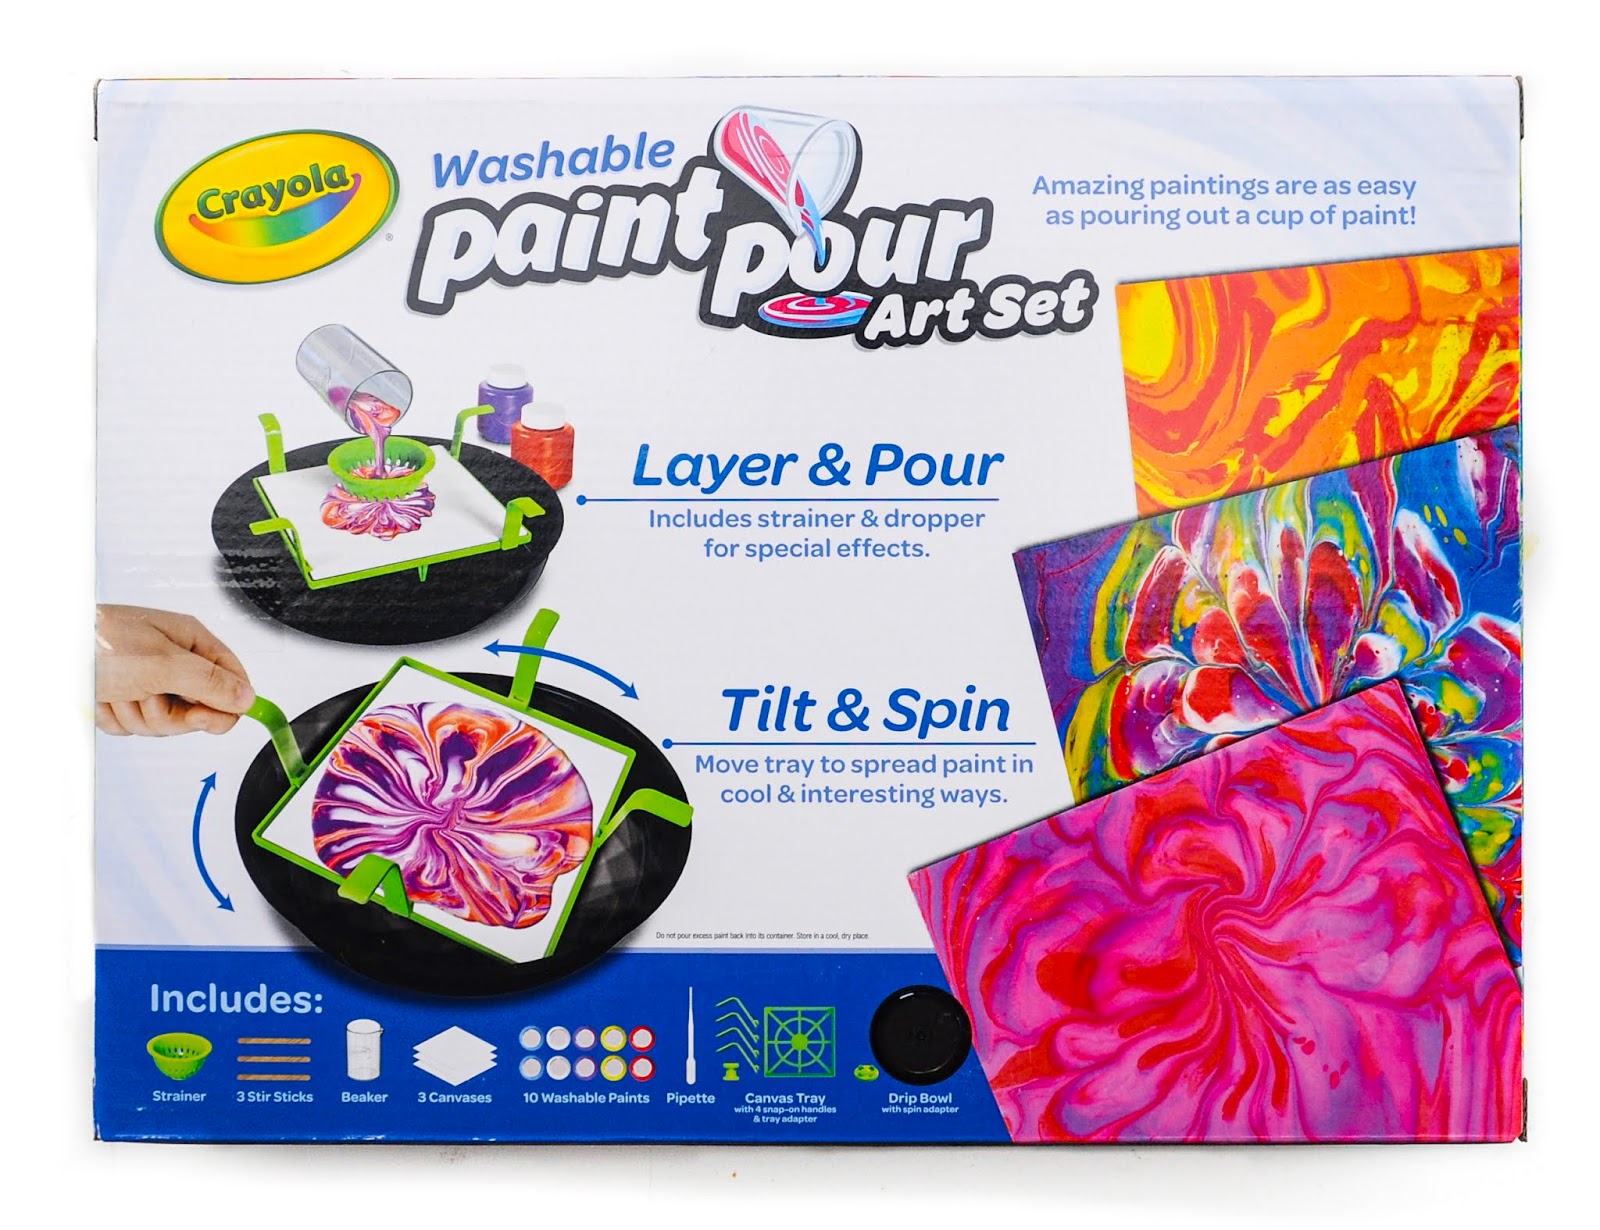 Crayola Valentine's Collection: What's Inside the Box